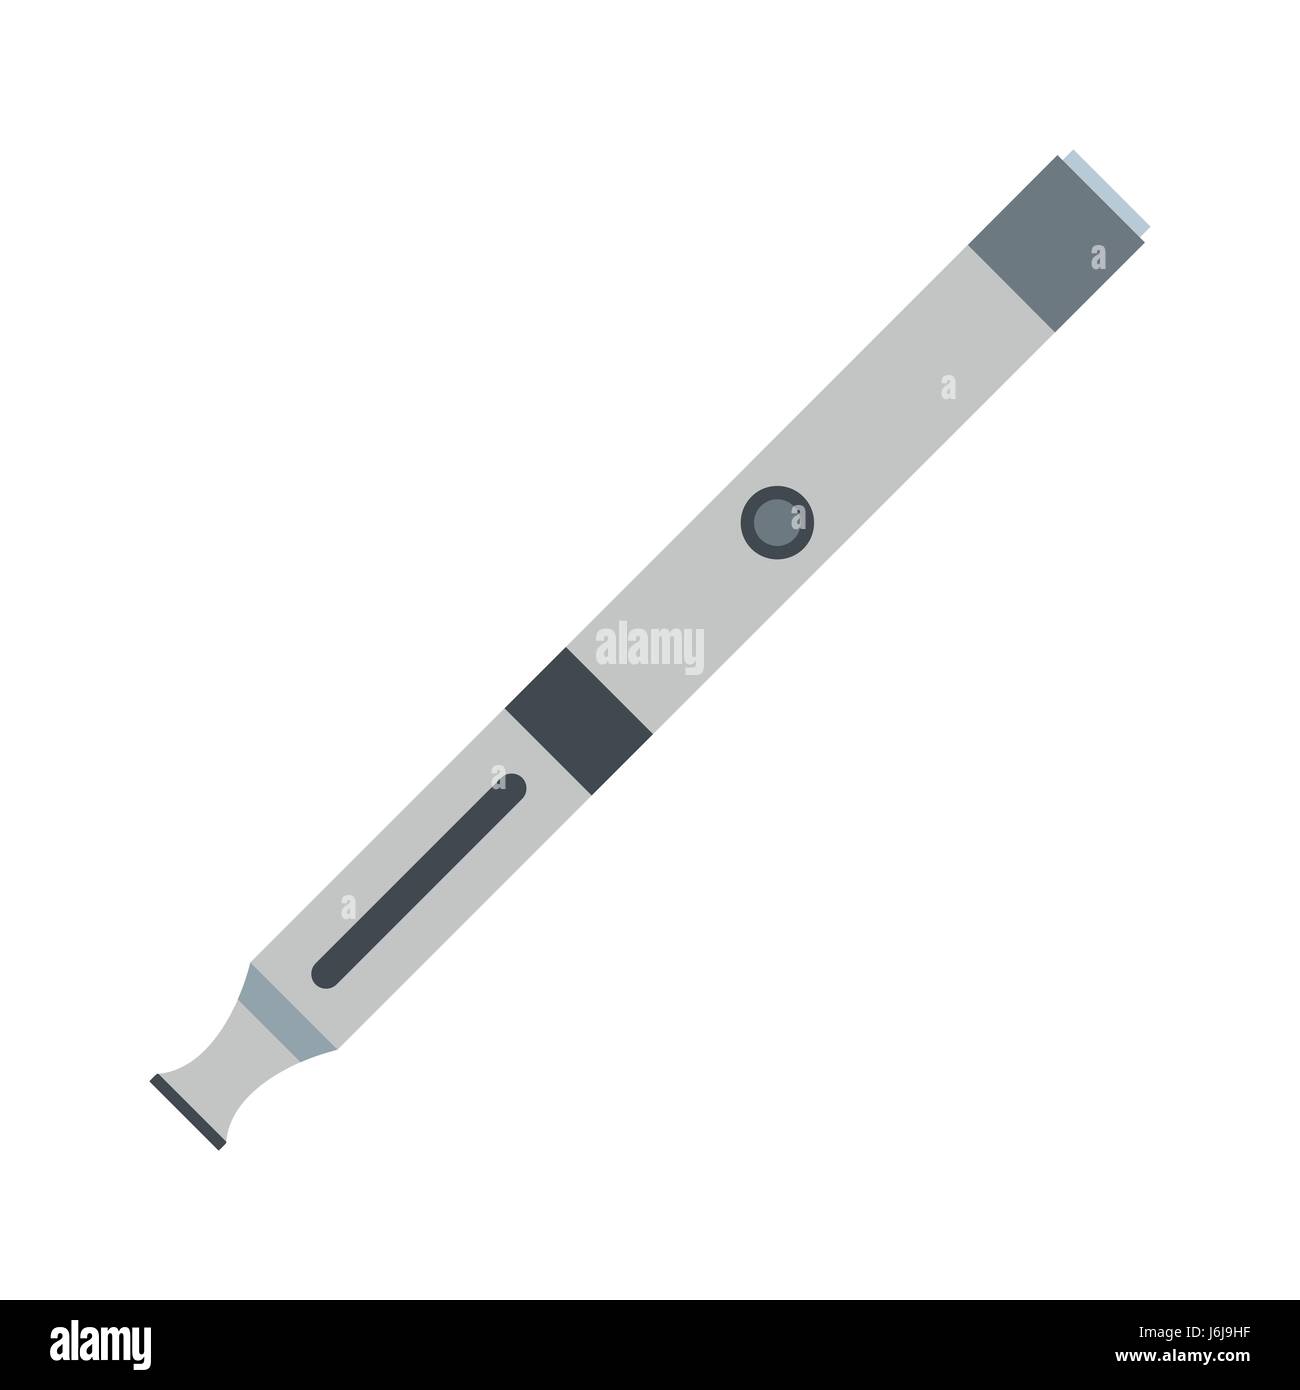 Electronic cigarette icon, flat style Stock Vector